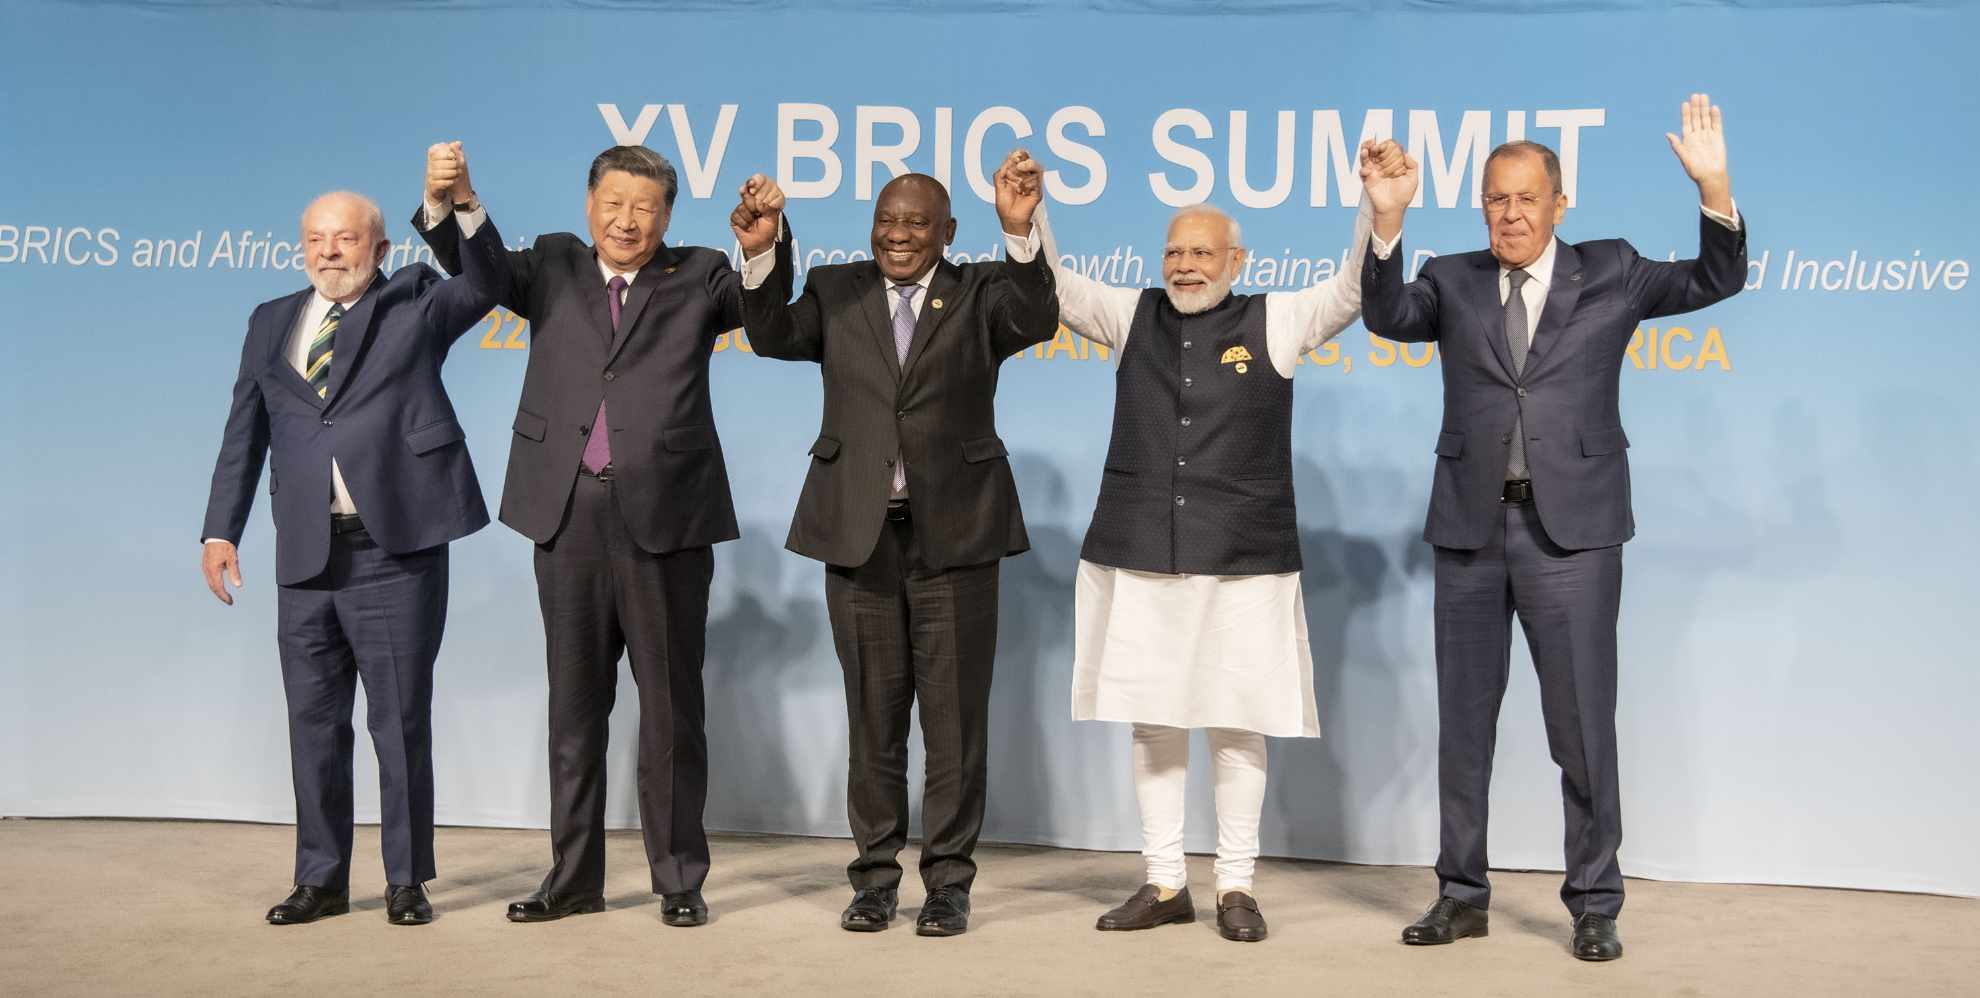 A Few More BRICS in The Wall: How to Respond to China and Russia’s Emerging Bloc of Nations